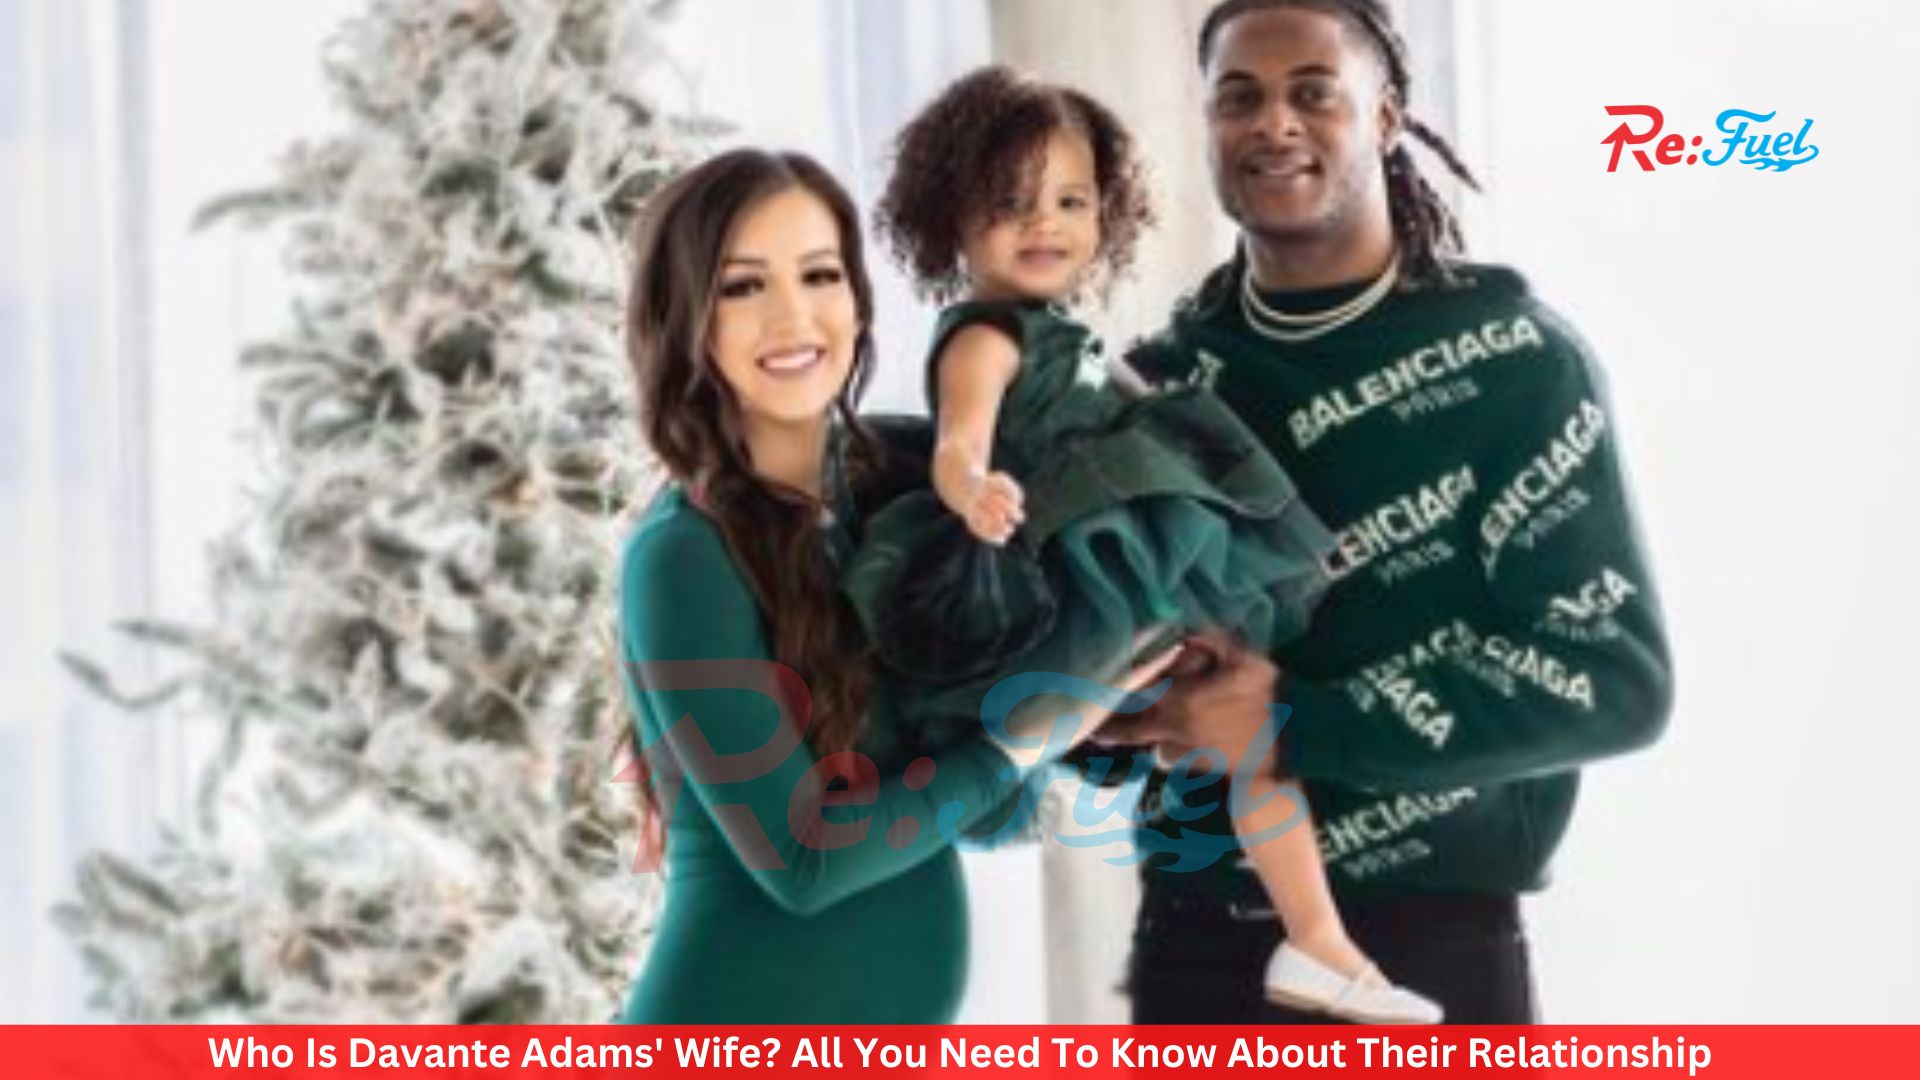 Who Is Davante Adams' Wife? All You Need To Know About Their Relationship